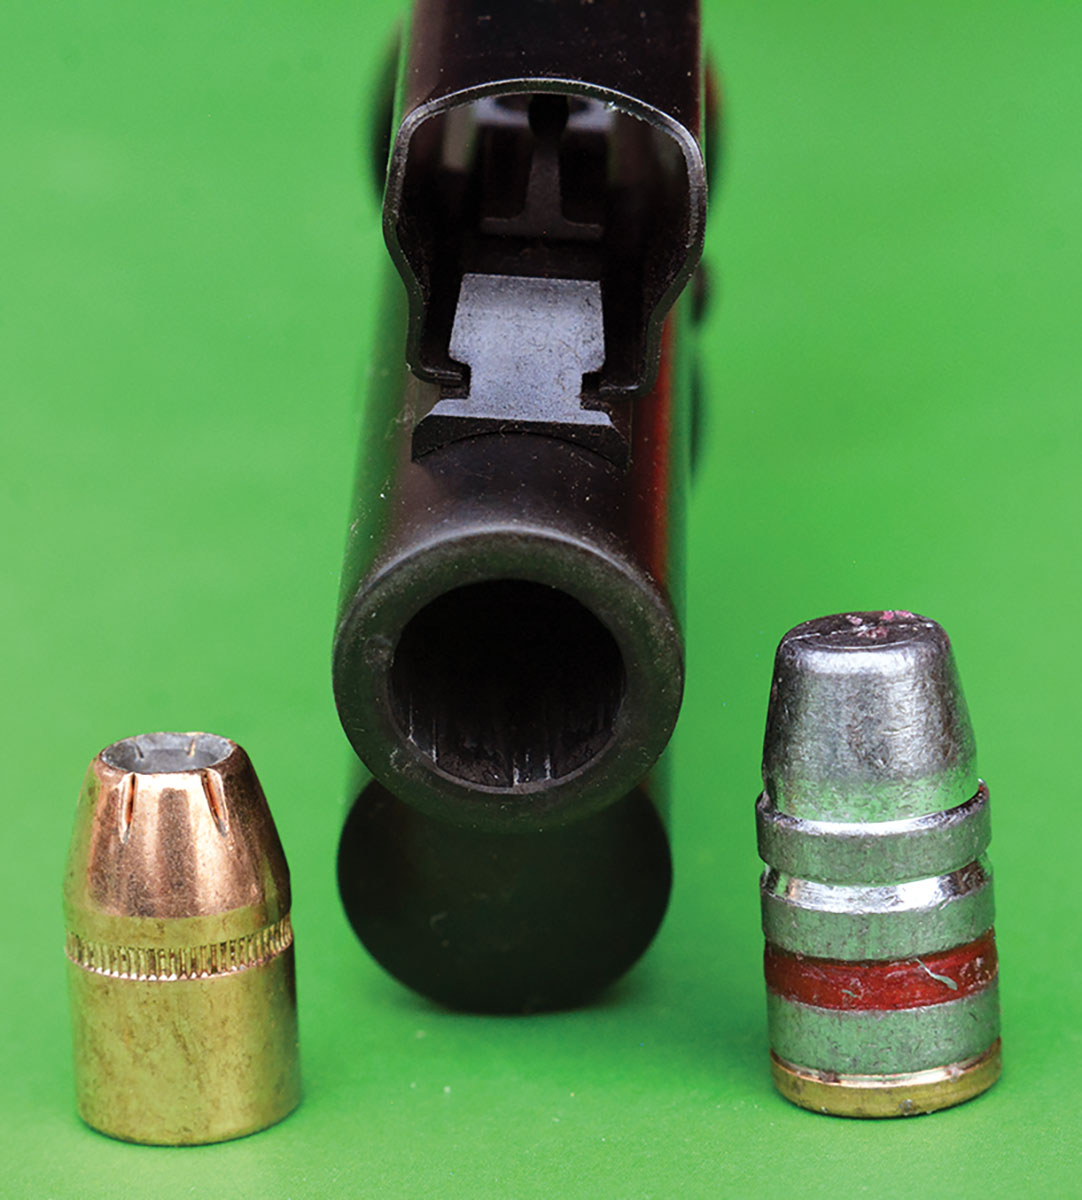 The 44 Magnum is considered a big-bore cartridge and offers notably different performance with JHP-style bullets such as the Hornady 240-grain XTP (left) that is hugely popular with whitetail deer hunters and the Rim Rock 295-grain SWC with gas check (right).